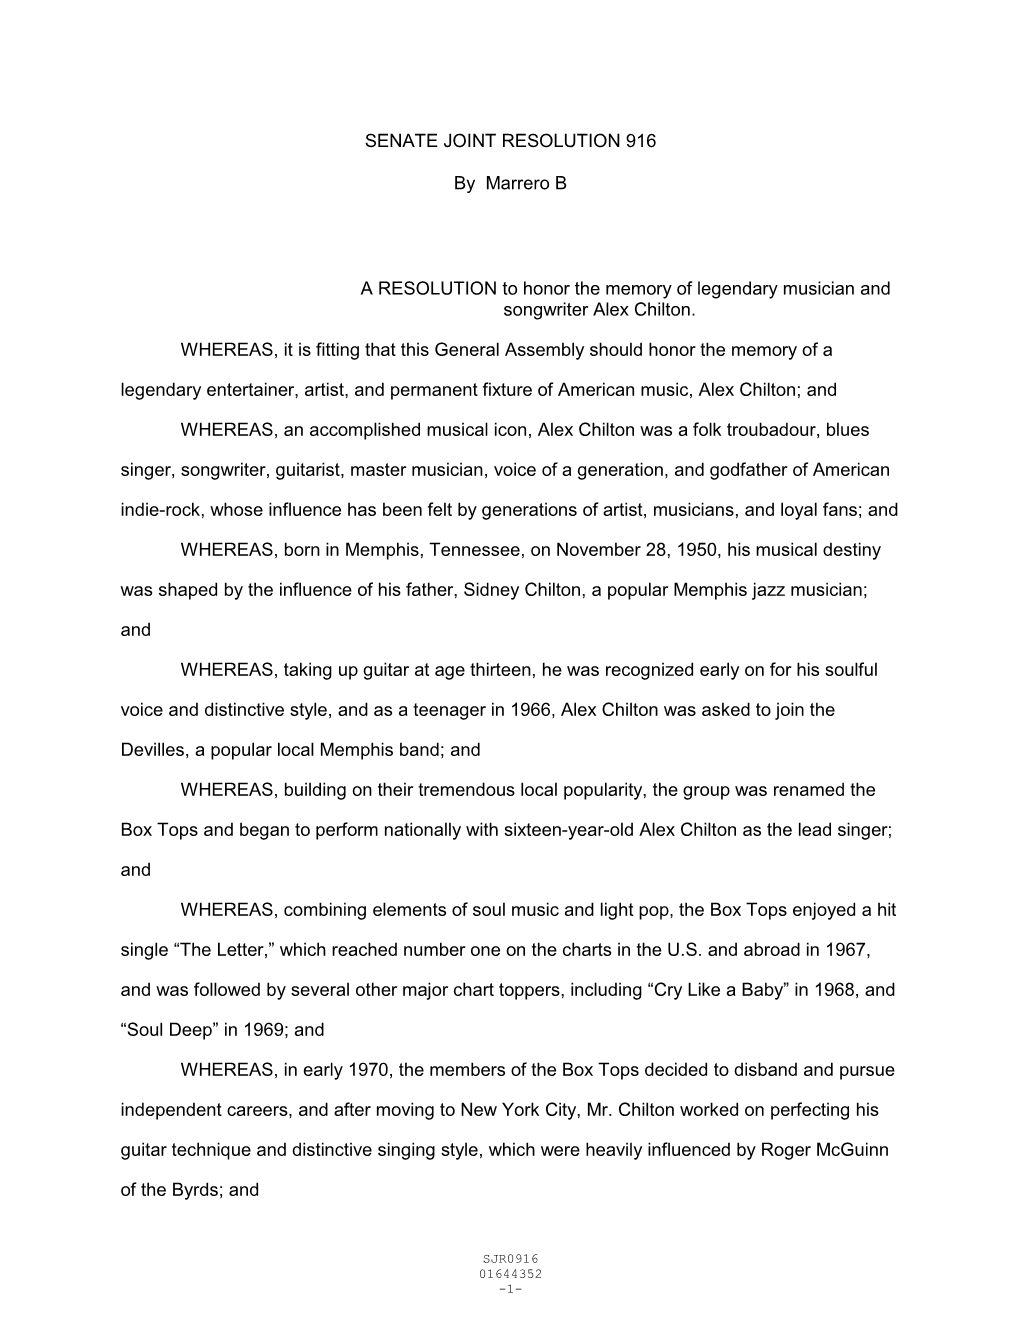 SENATE JOINT RESOLUTION 916 by Marrero B a RESOLUTION To